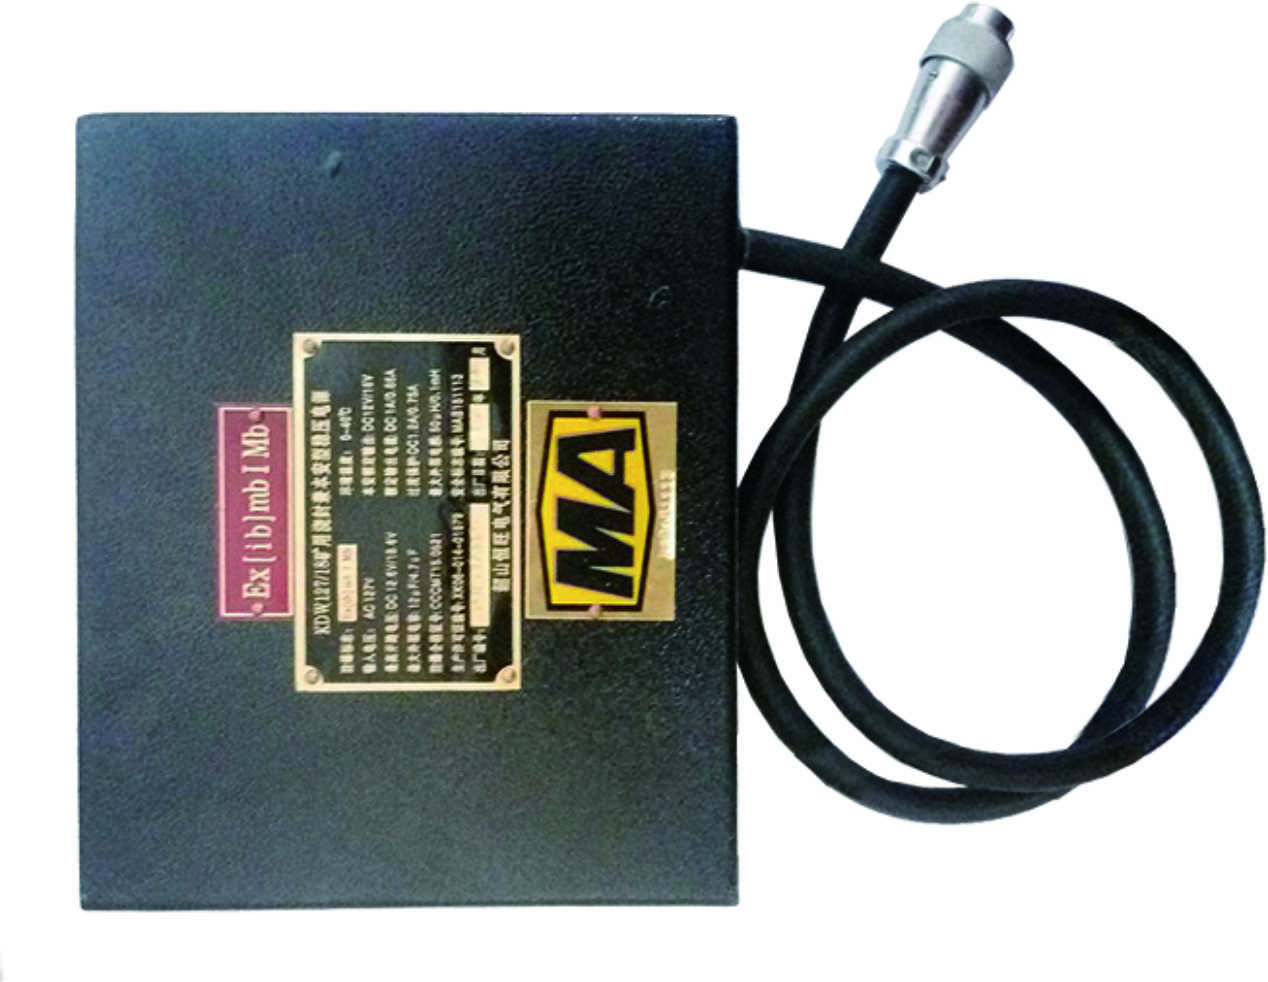 KDW127/18 Mining Sealing and Intrinsic Safety Stable Power Supply